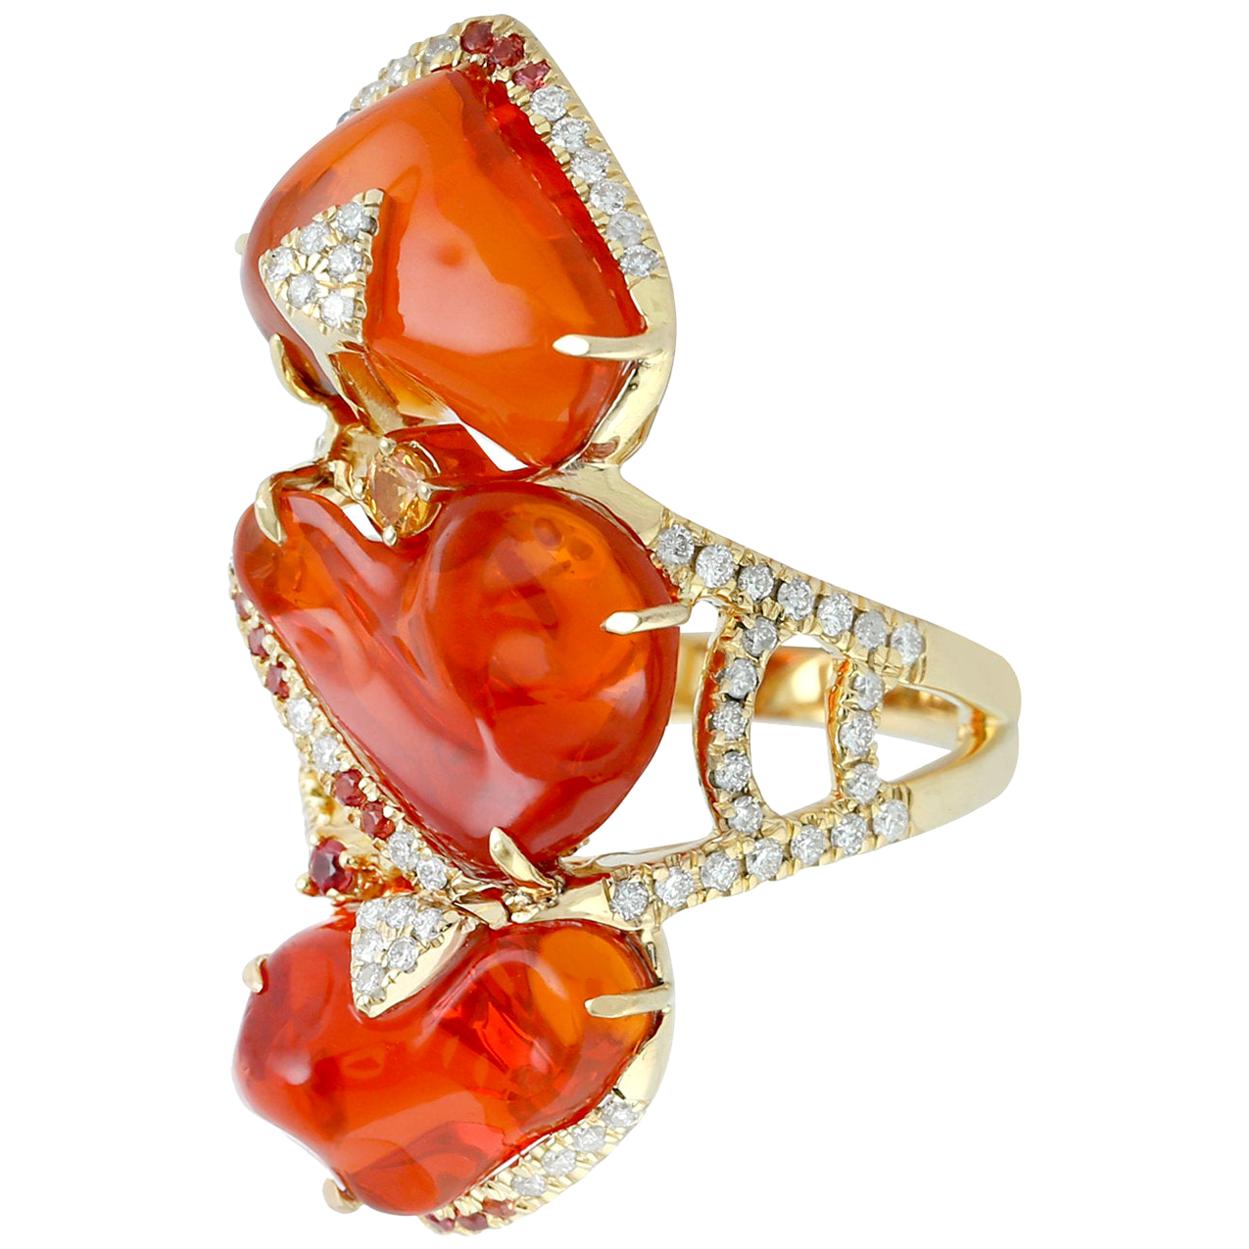 Stylish Fire Opal Ring with Diamonds and Sapphire Set in 18 Karat Gold